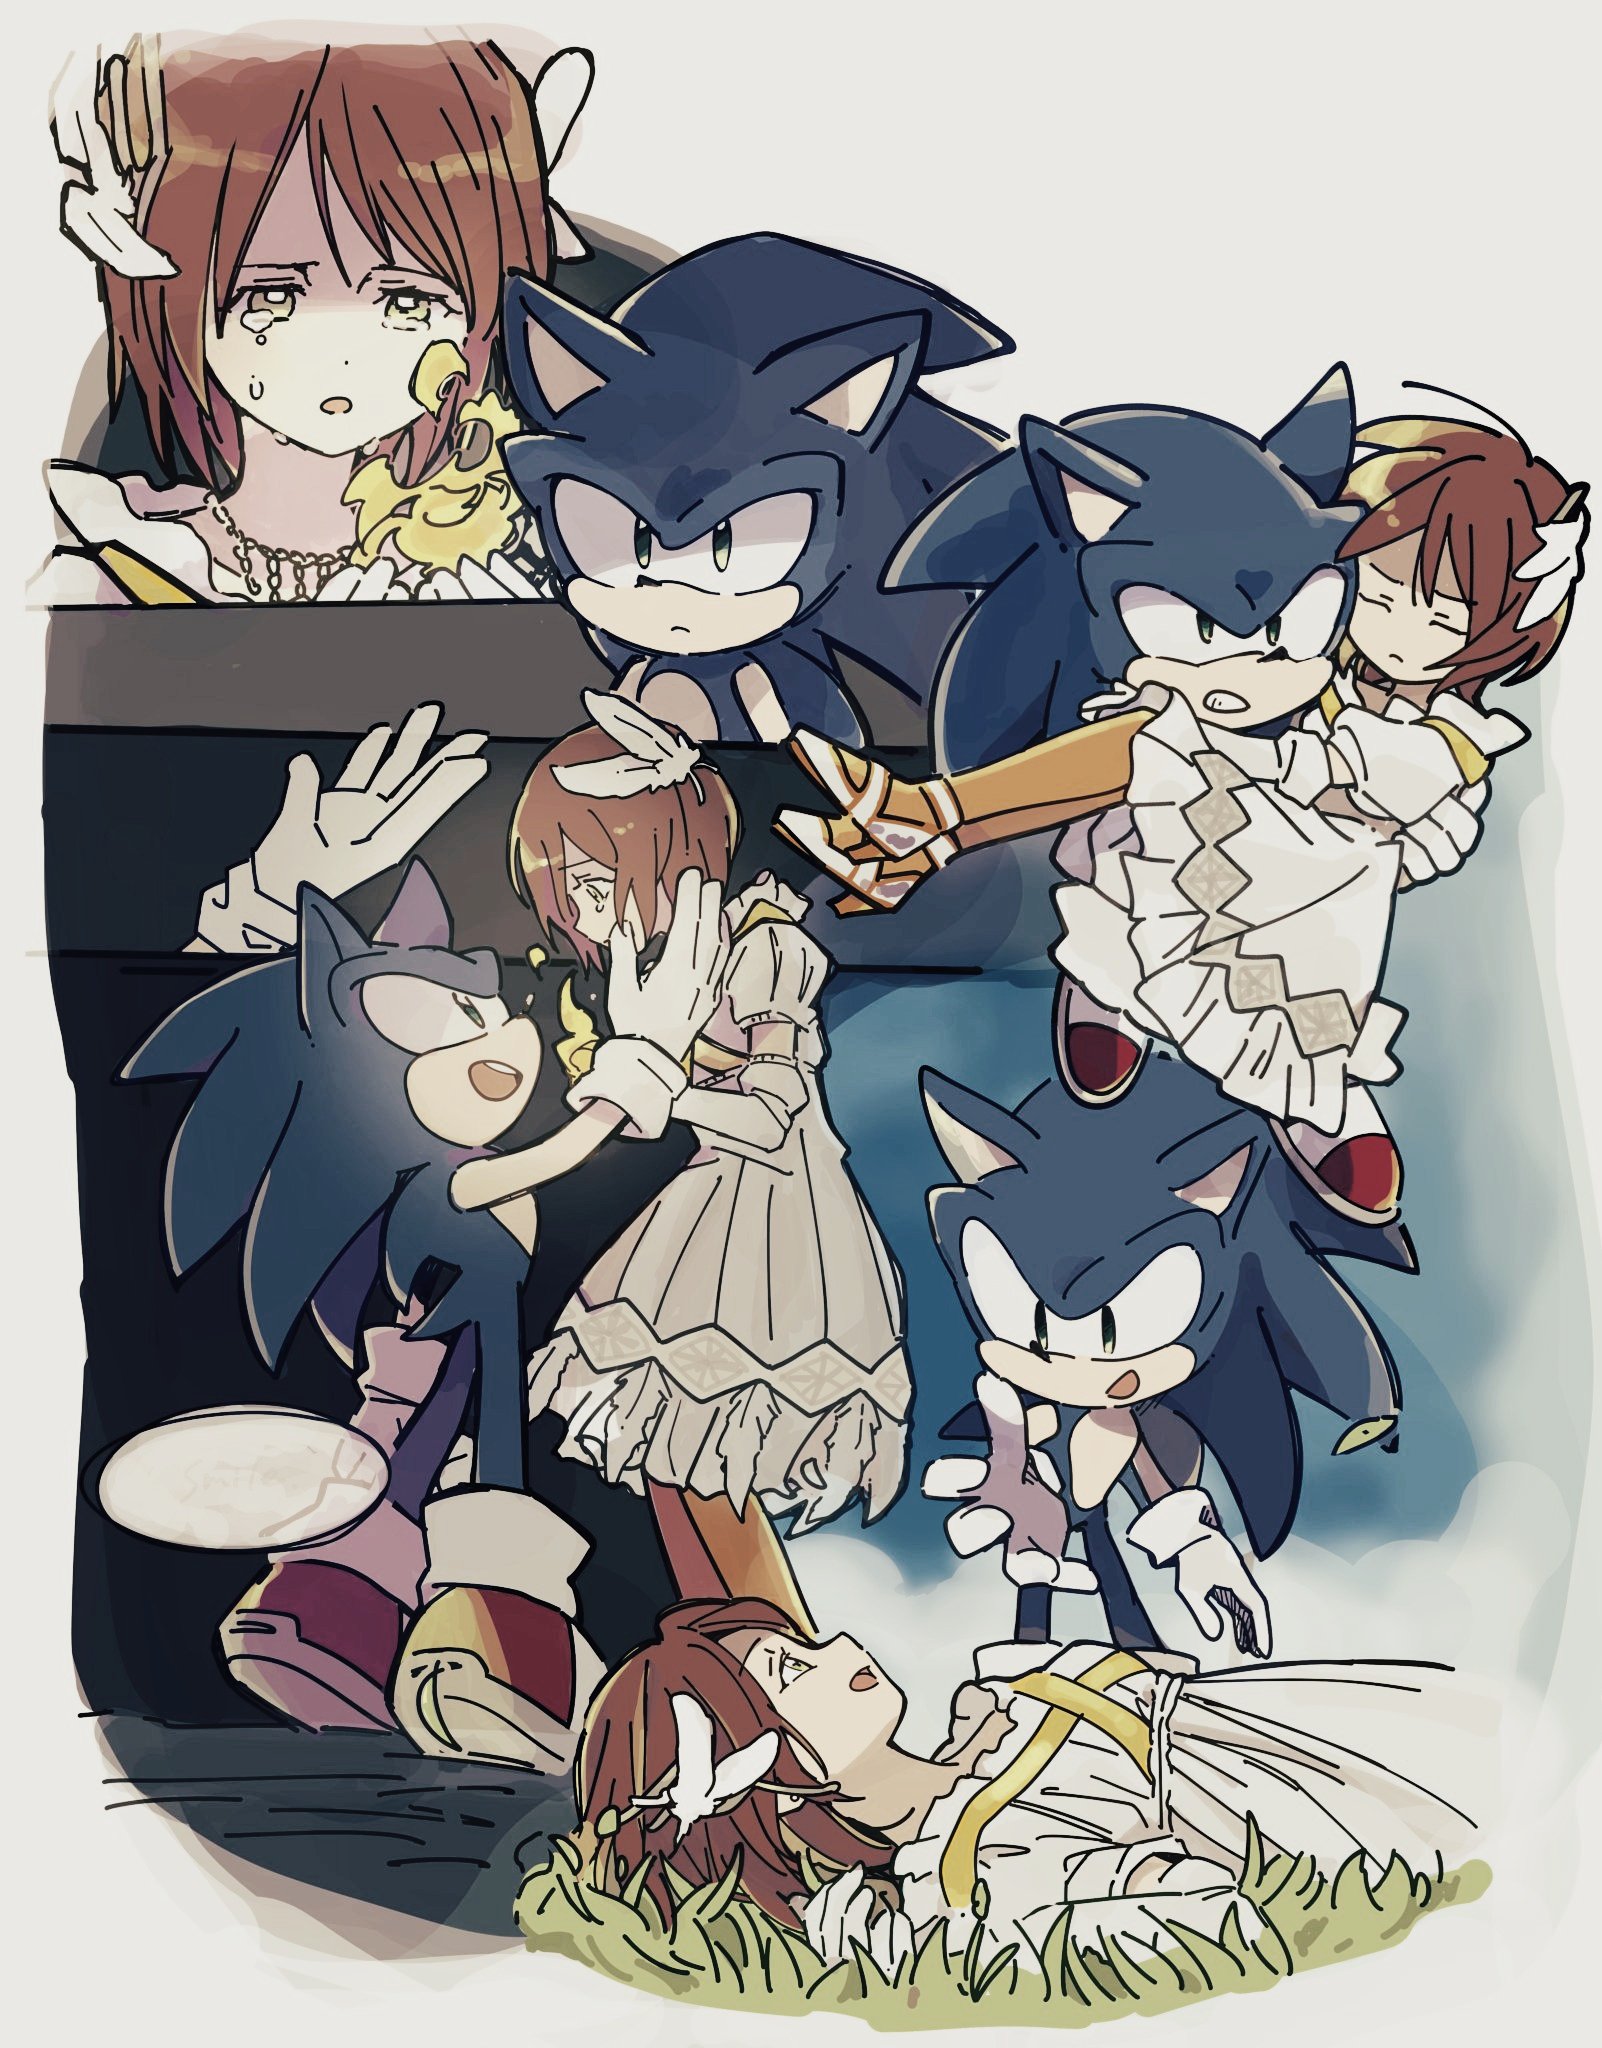 sonic the hedgehog and princess elise the third (sonic and 1 more